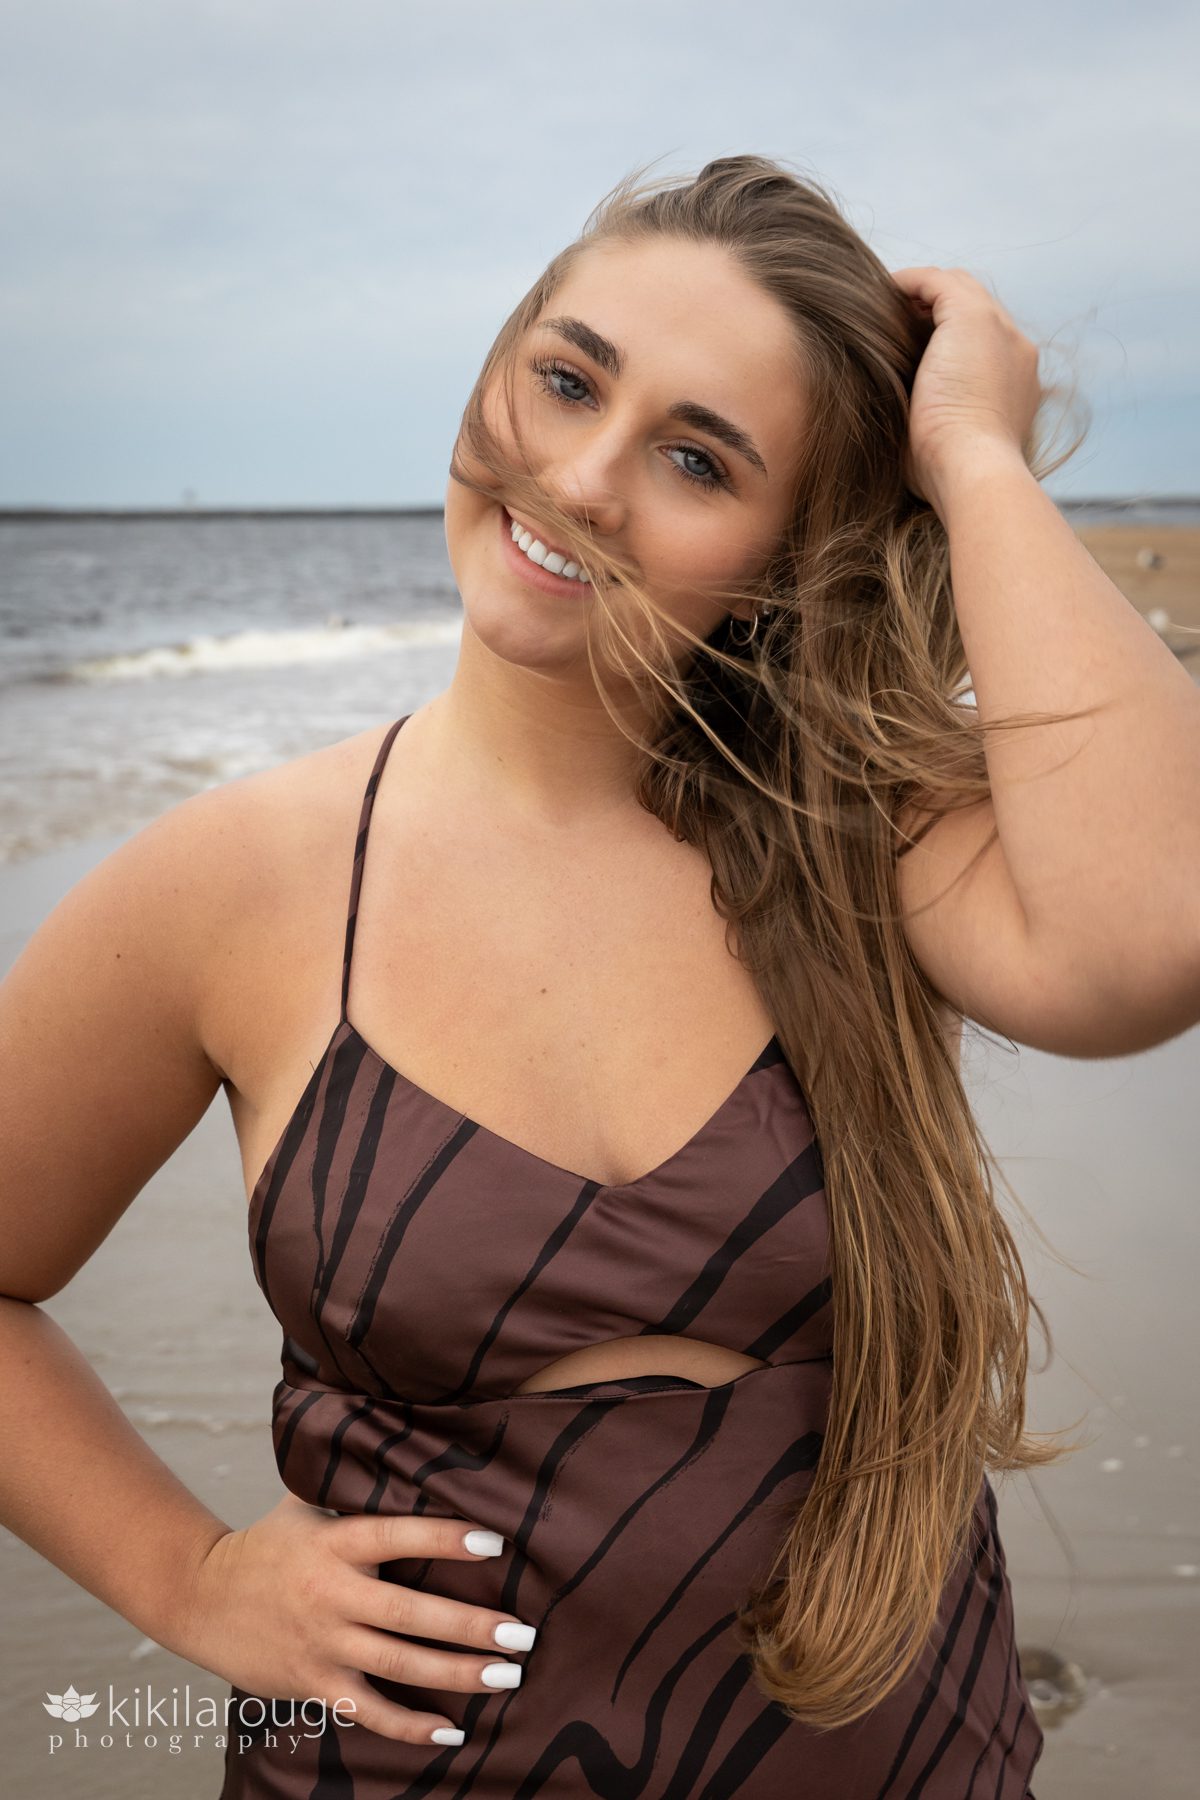 Girl in brown dress with hair blowing at Plum Island Beach